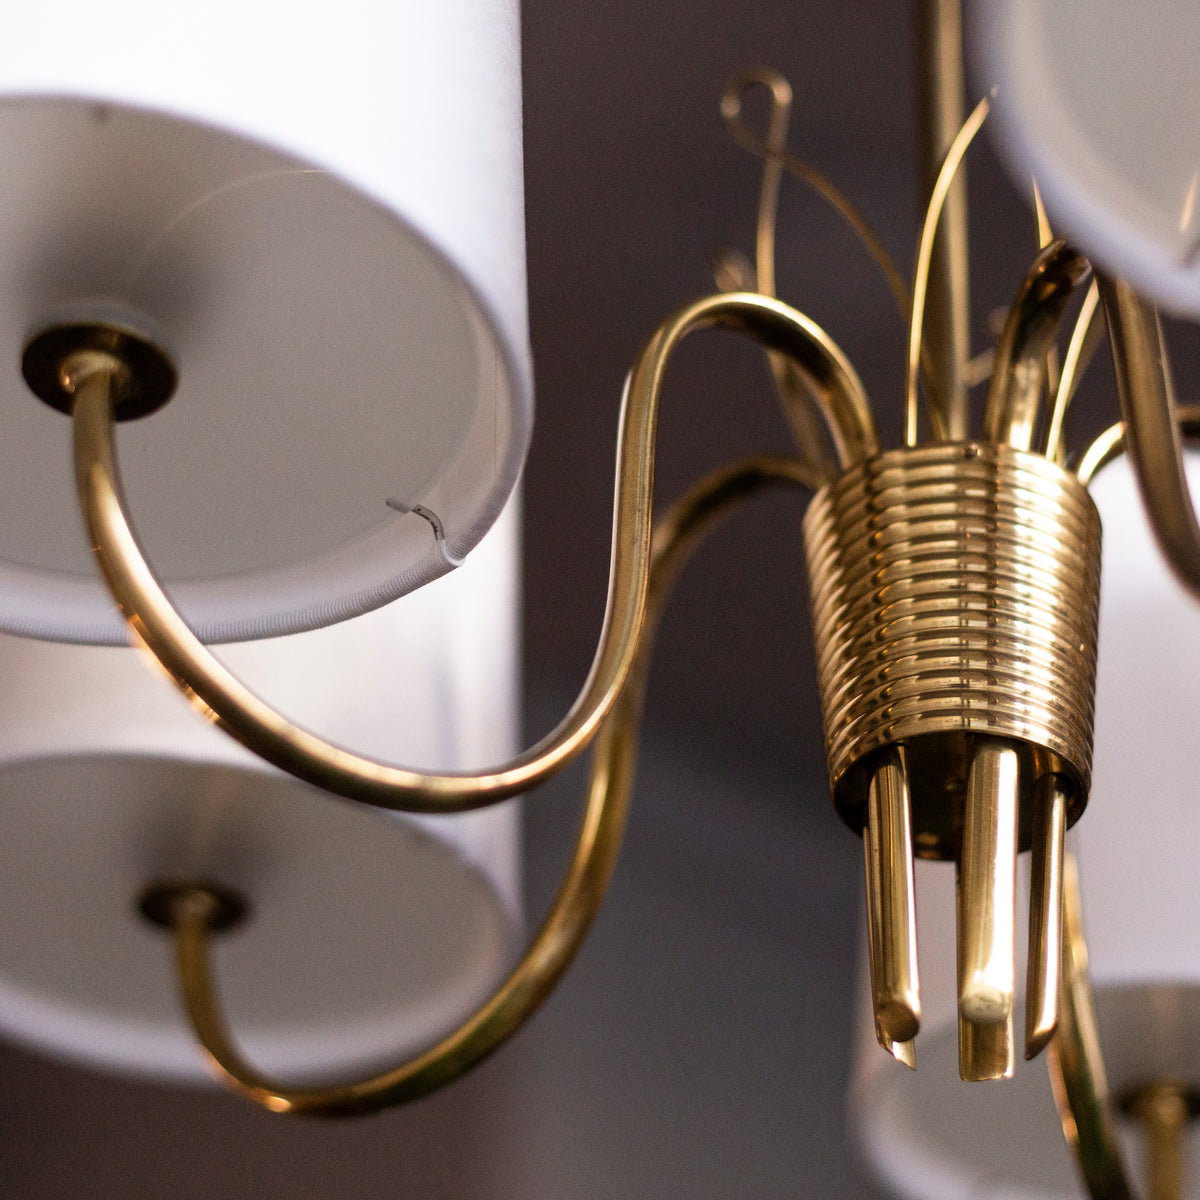 Model 9031 Five-Arm Chandelier / Paavo Tynell, Finland, 1940s